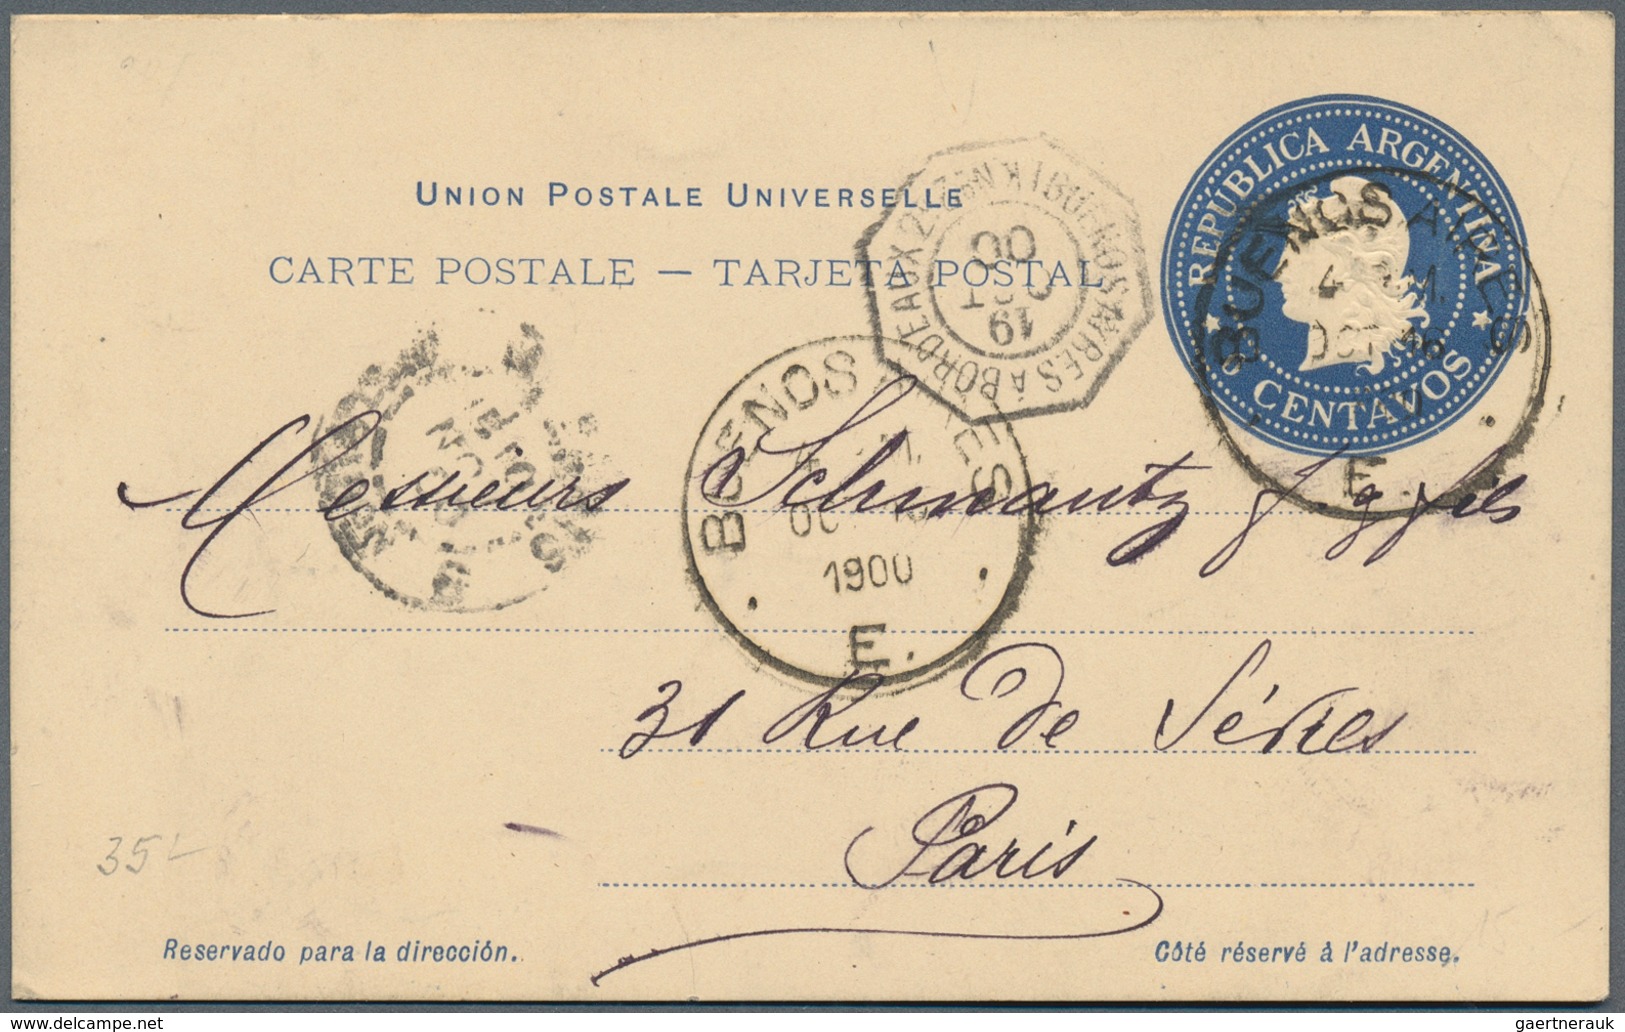 22184 Argentinien: 1865-1908 ca.: Collection of 21 covers, postcards and postal stationery items, three us